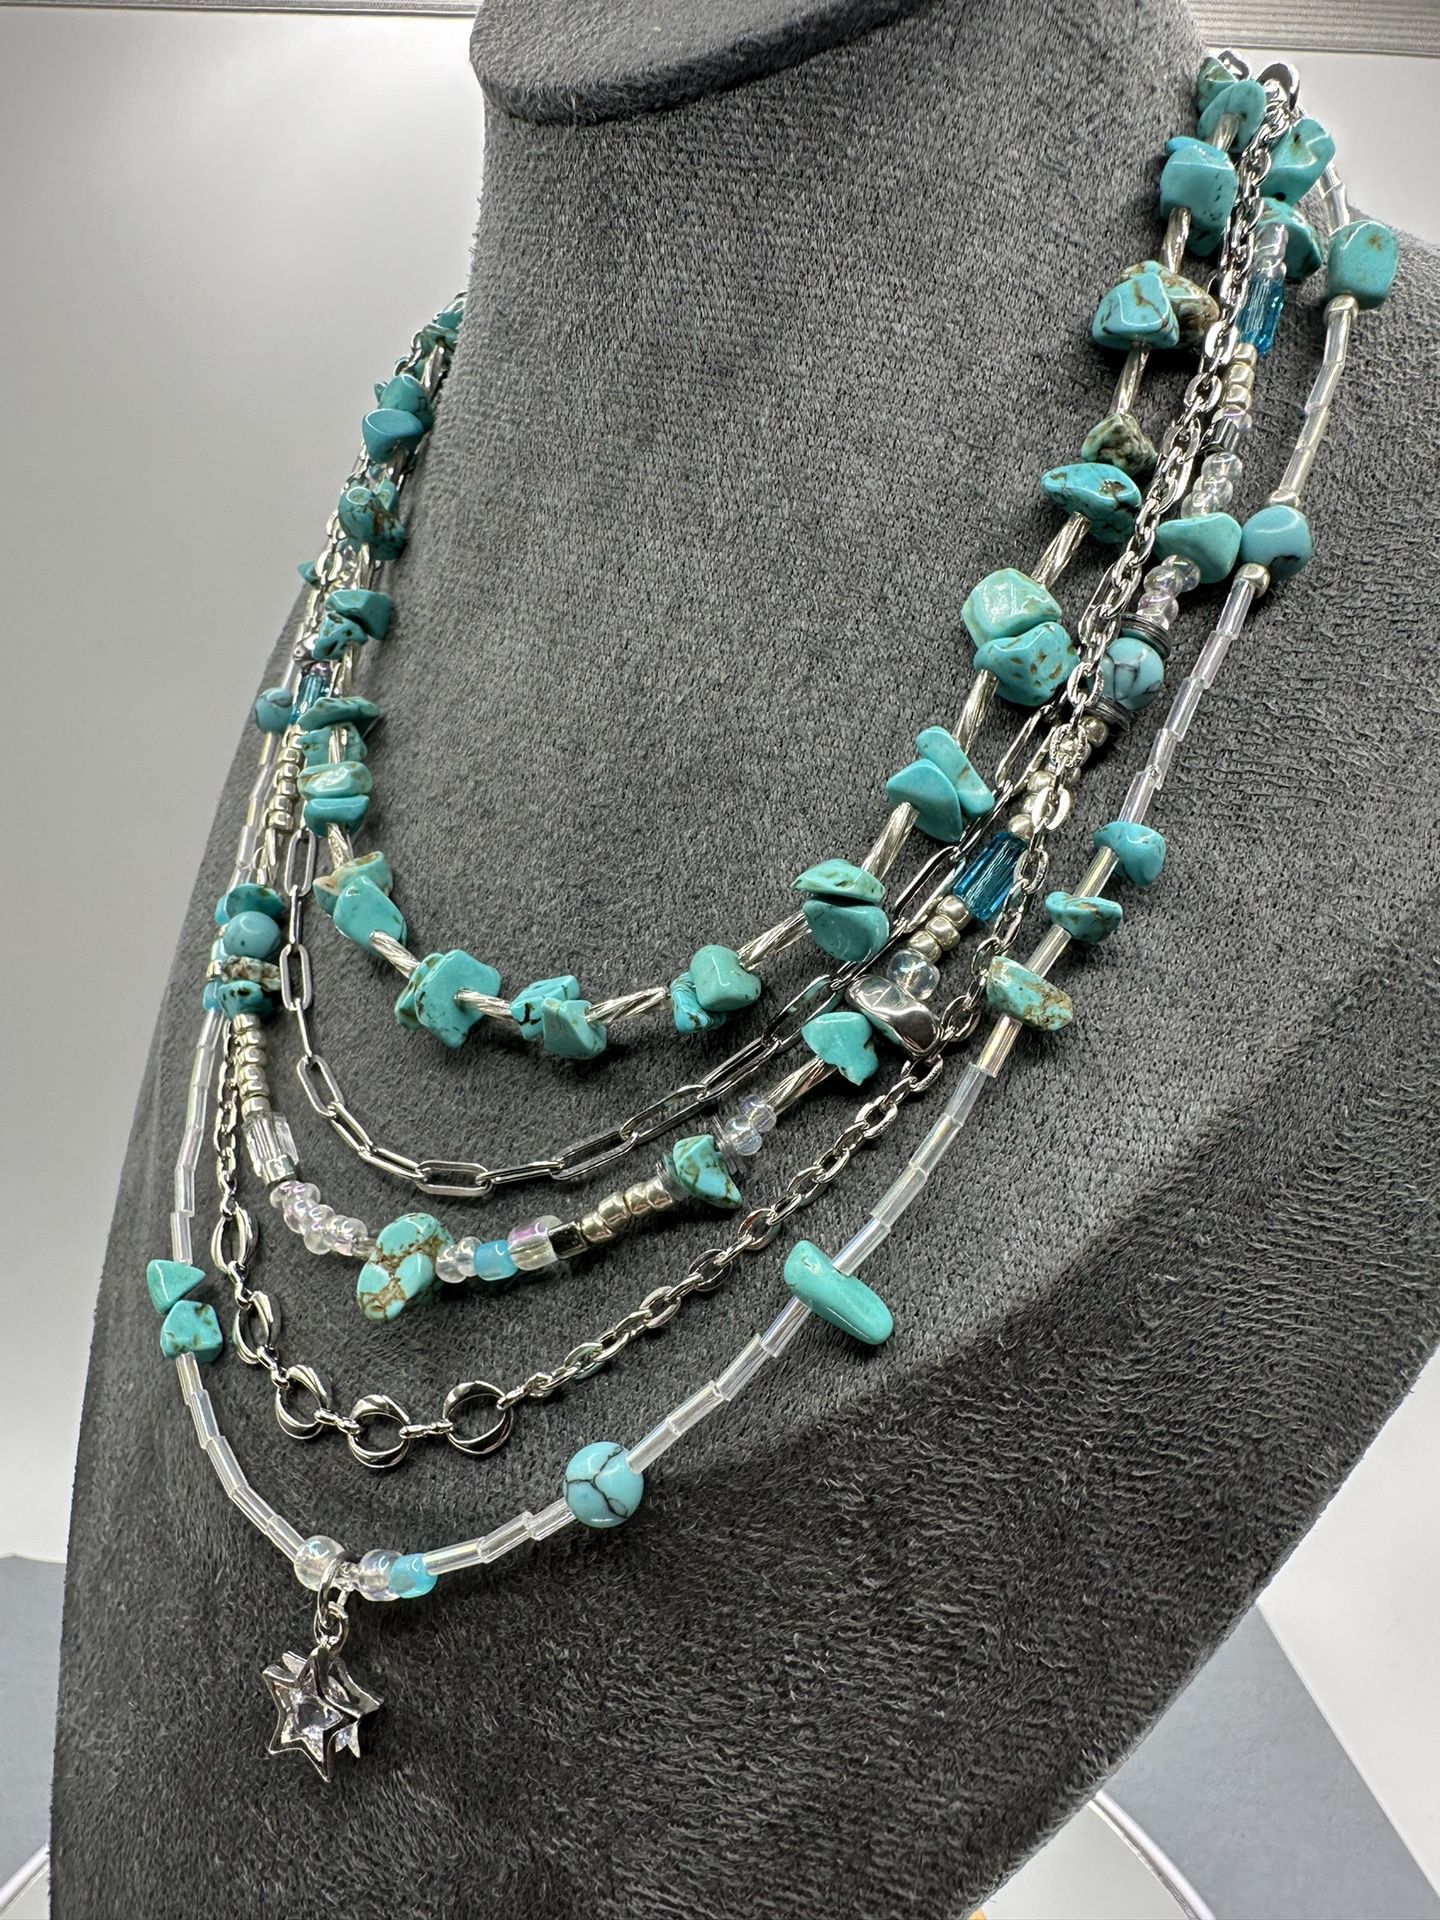 Boho style volume turquoise and chain choker, multi strand, 5 rows, beach style multilayered blue necklace